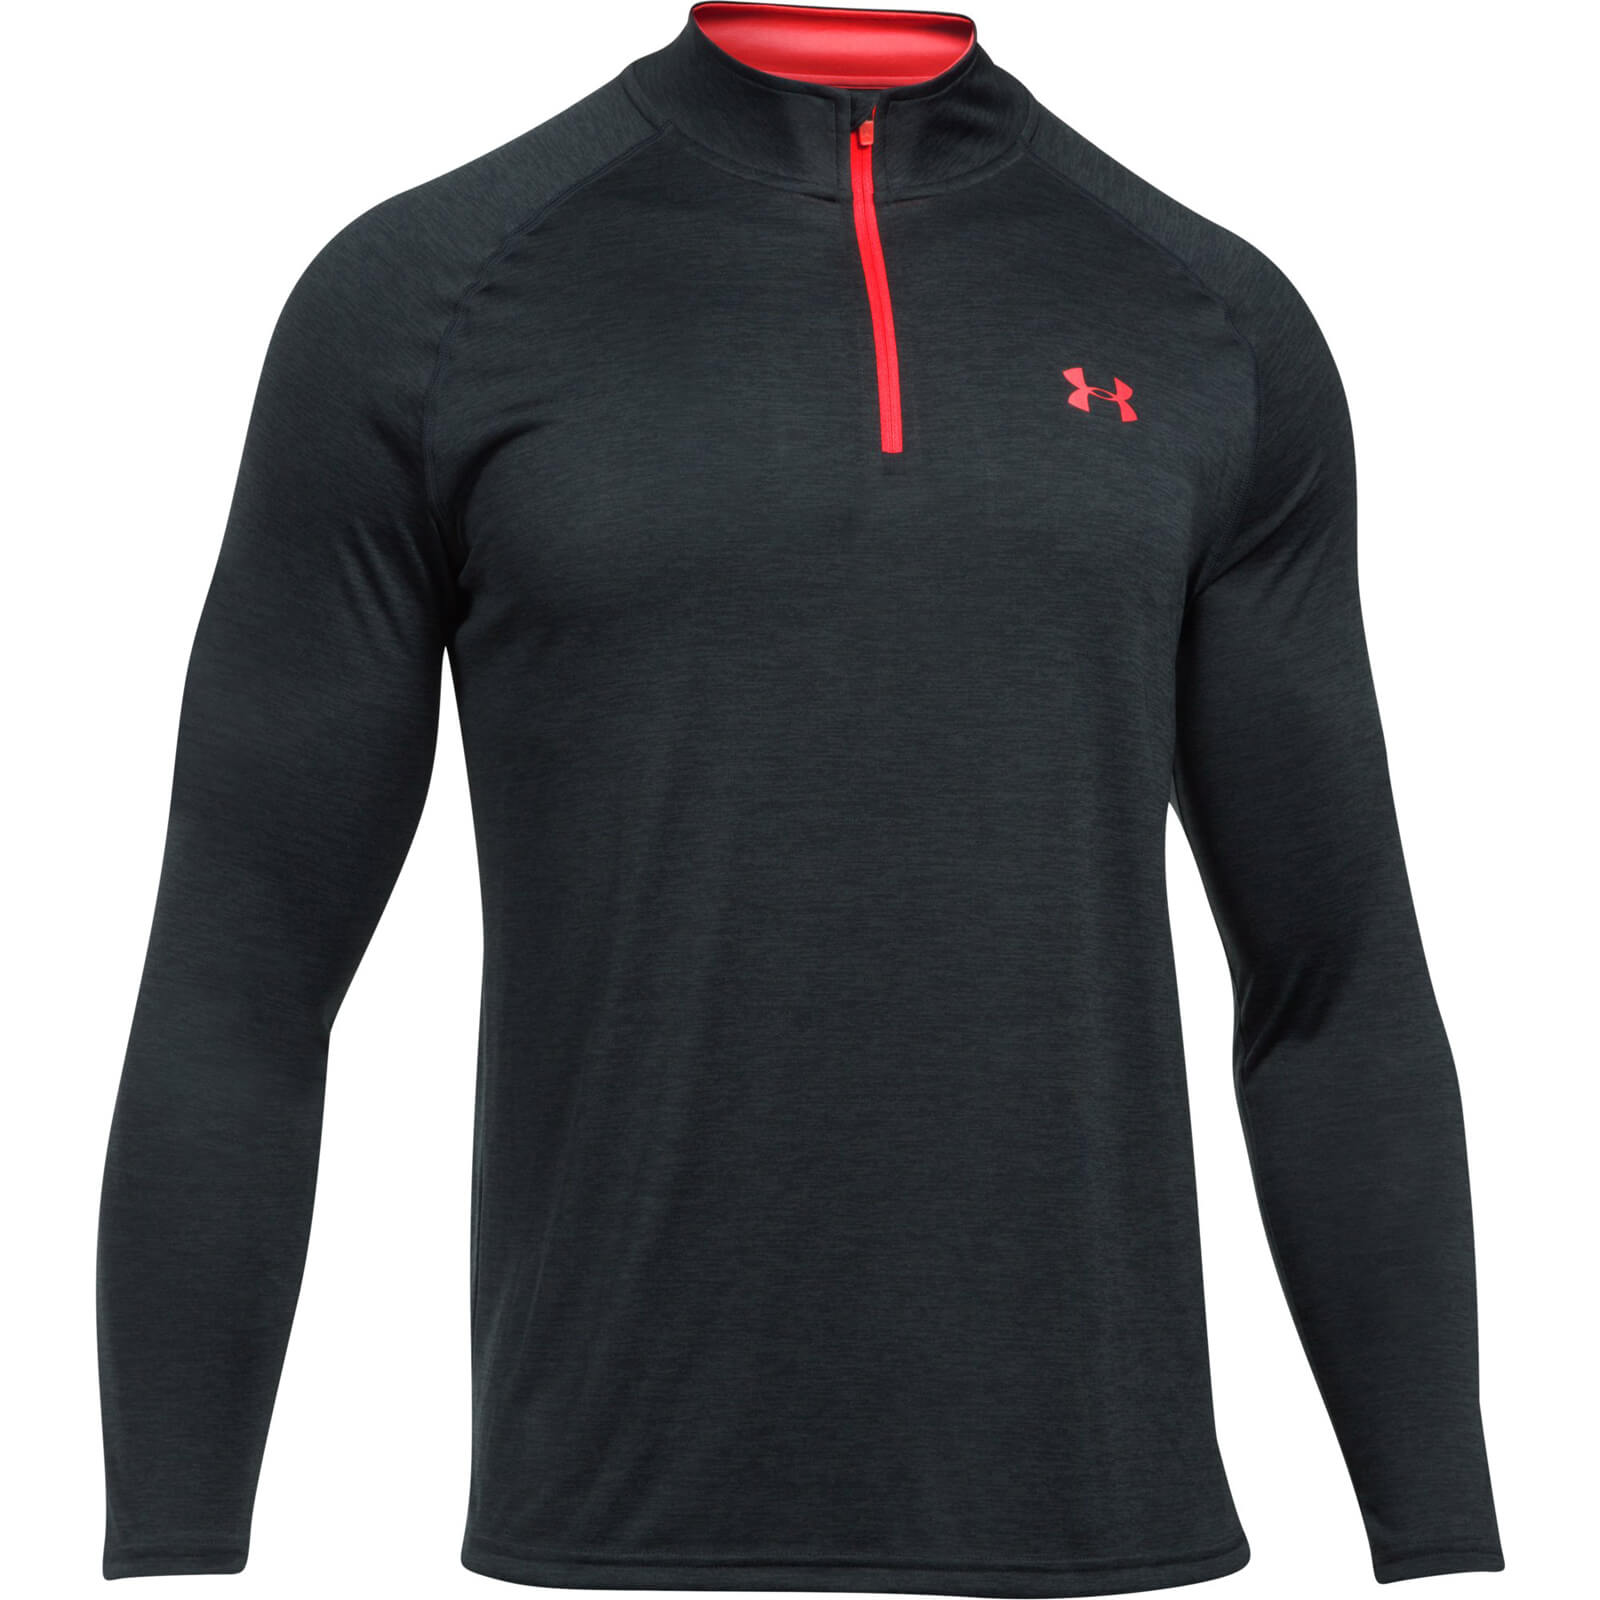 red long sleeve under armour